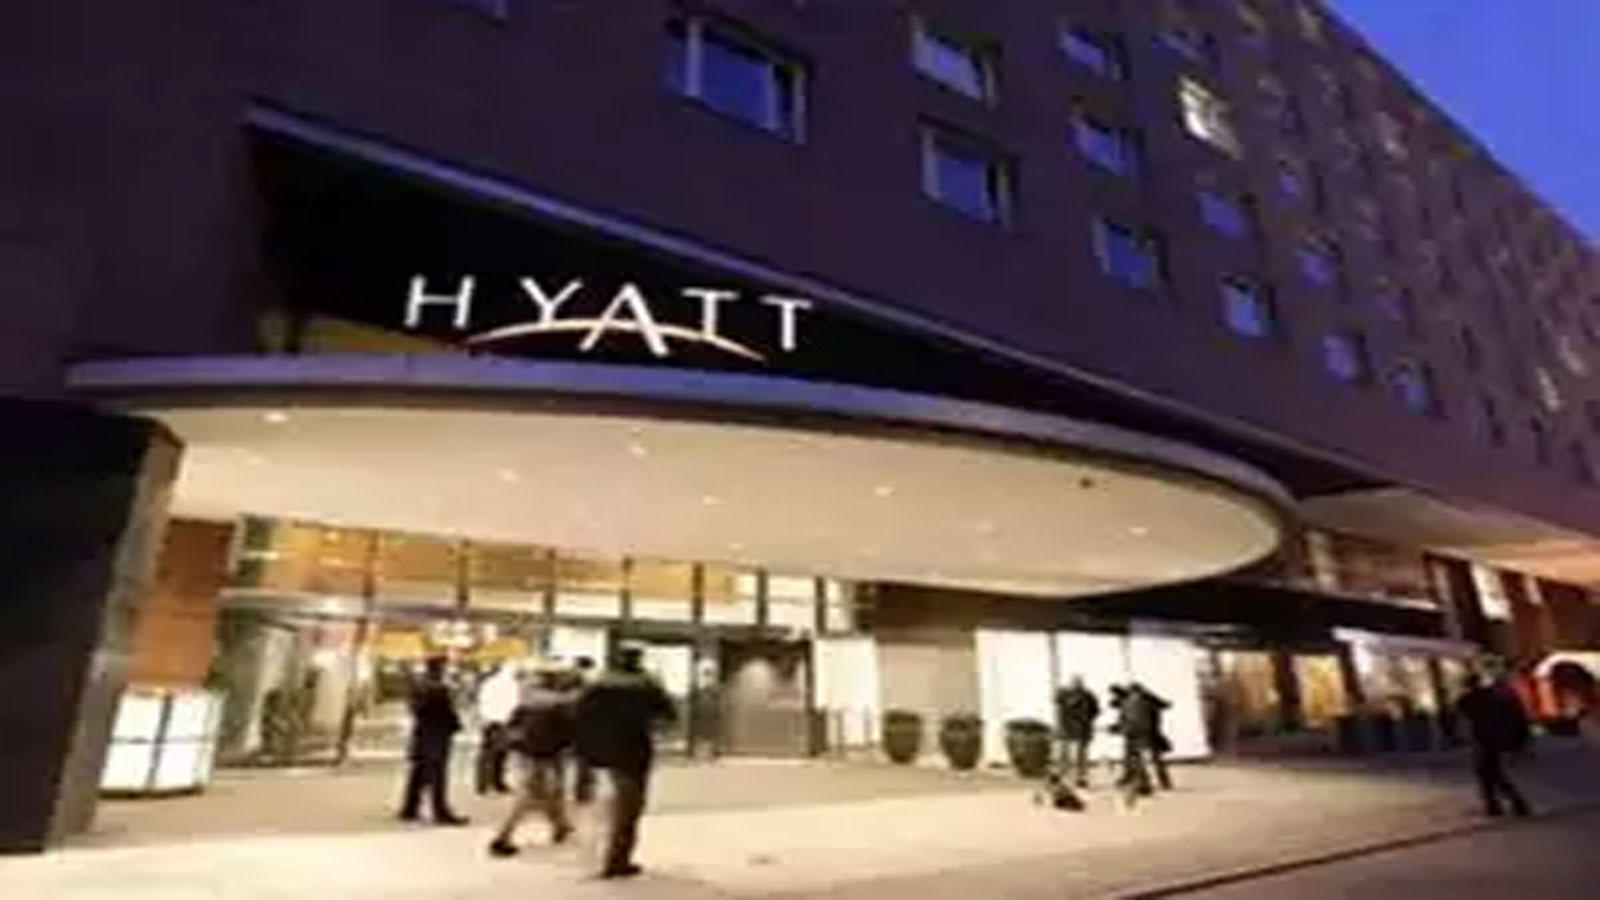 Hyatt Hotels Corporation Acquires Two Roads Hospitality (2018)